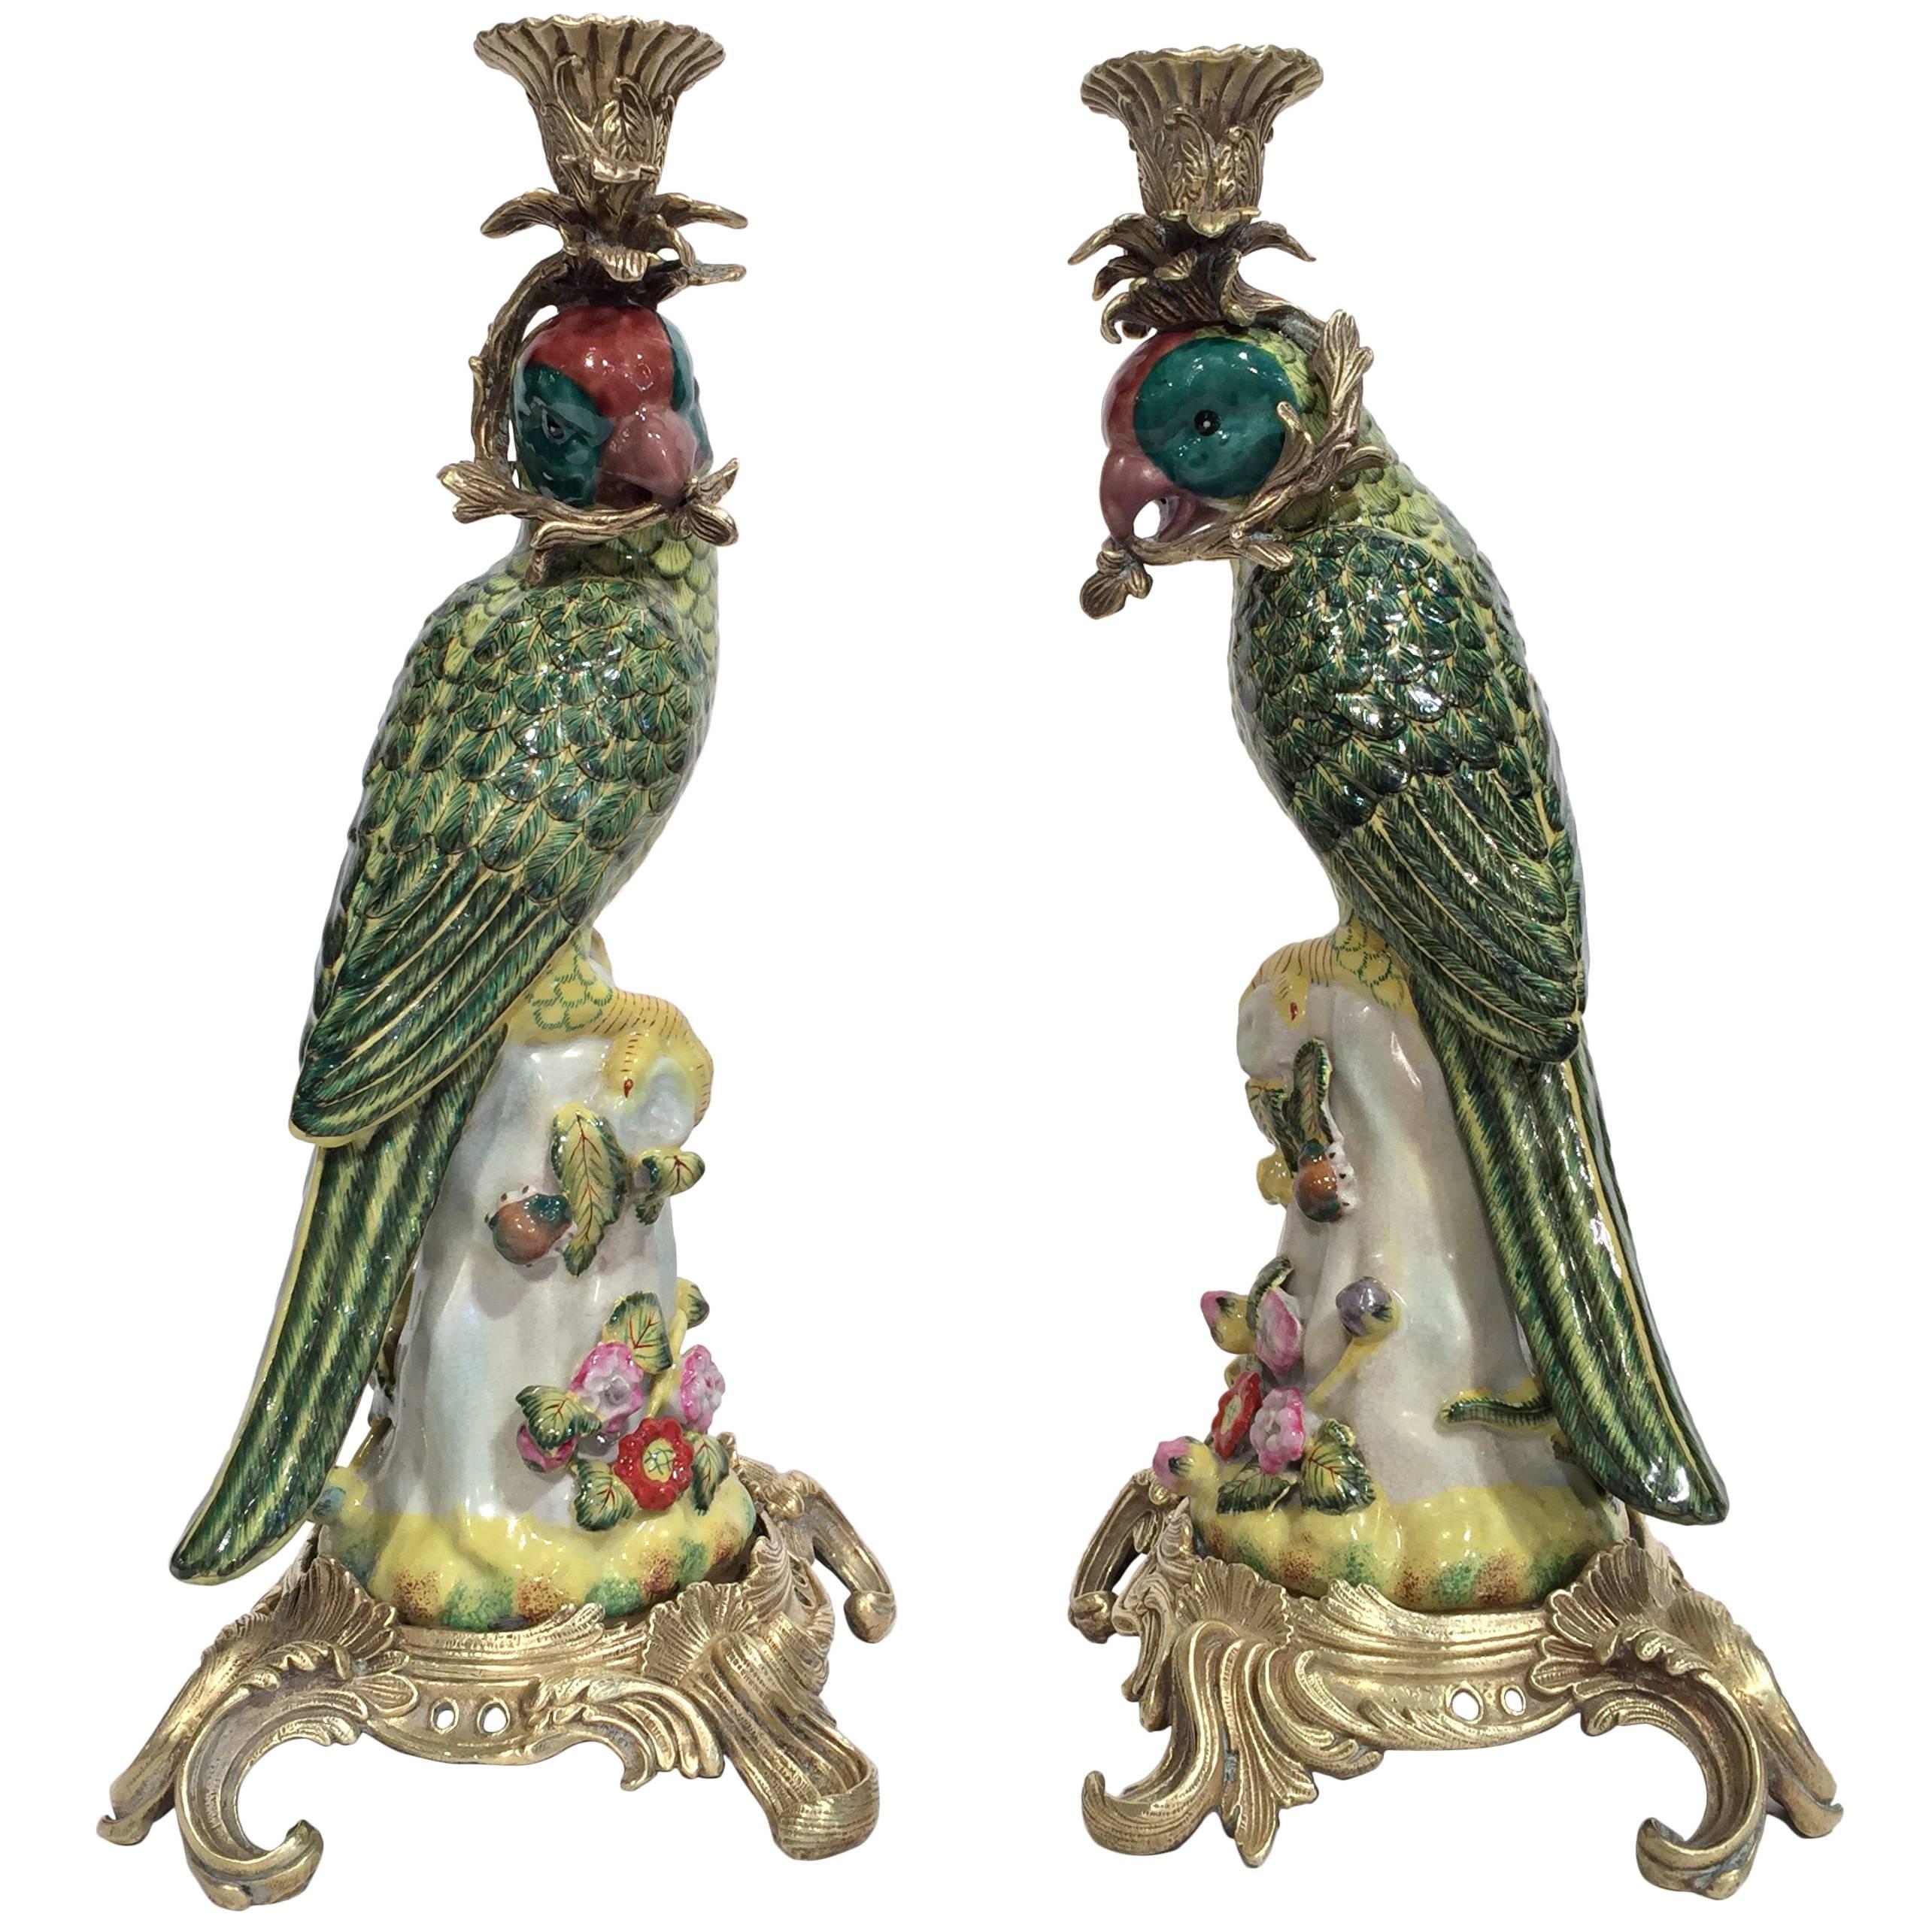 Pair of Antique Faience Candle Holders with Parrots on Bronze Bases 